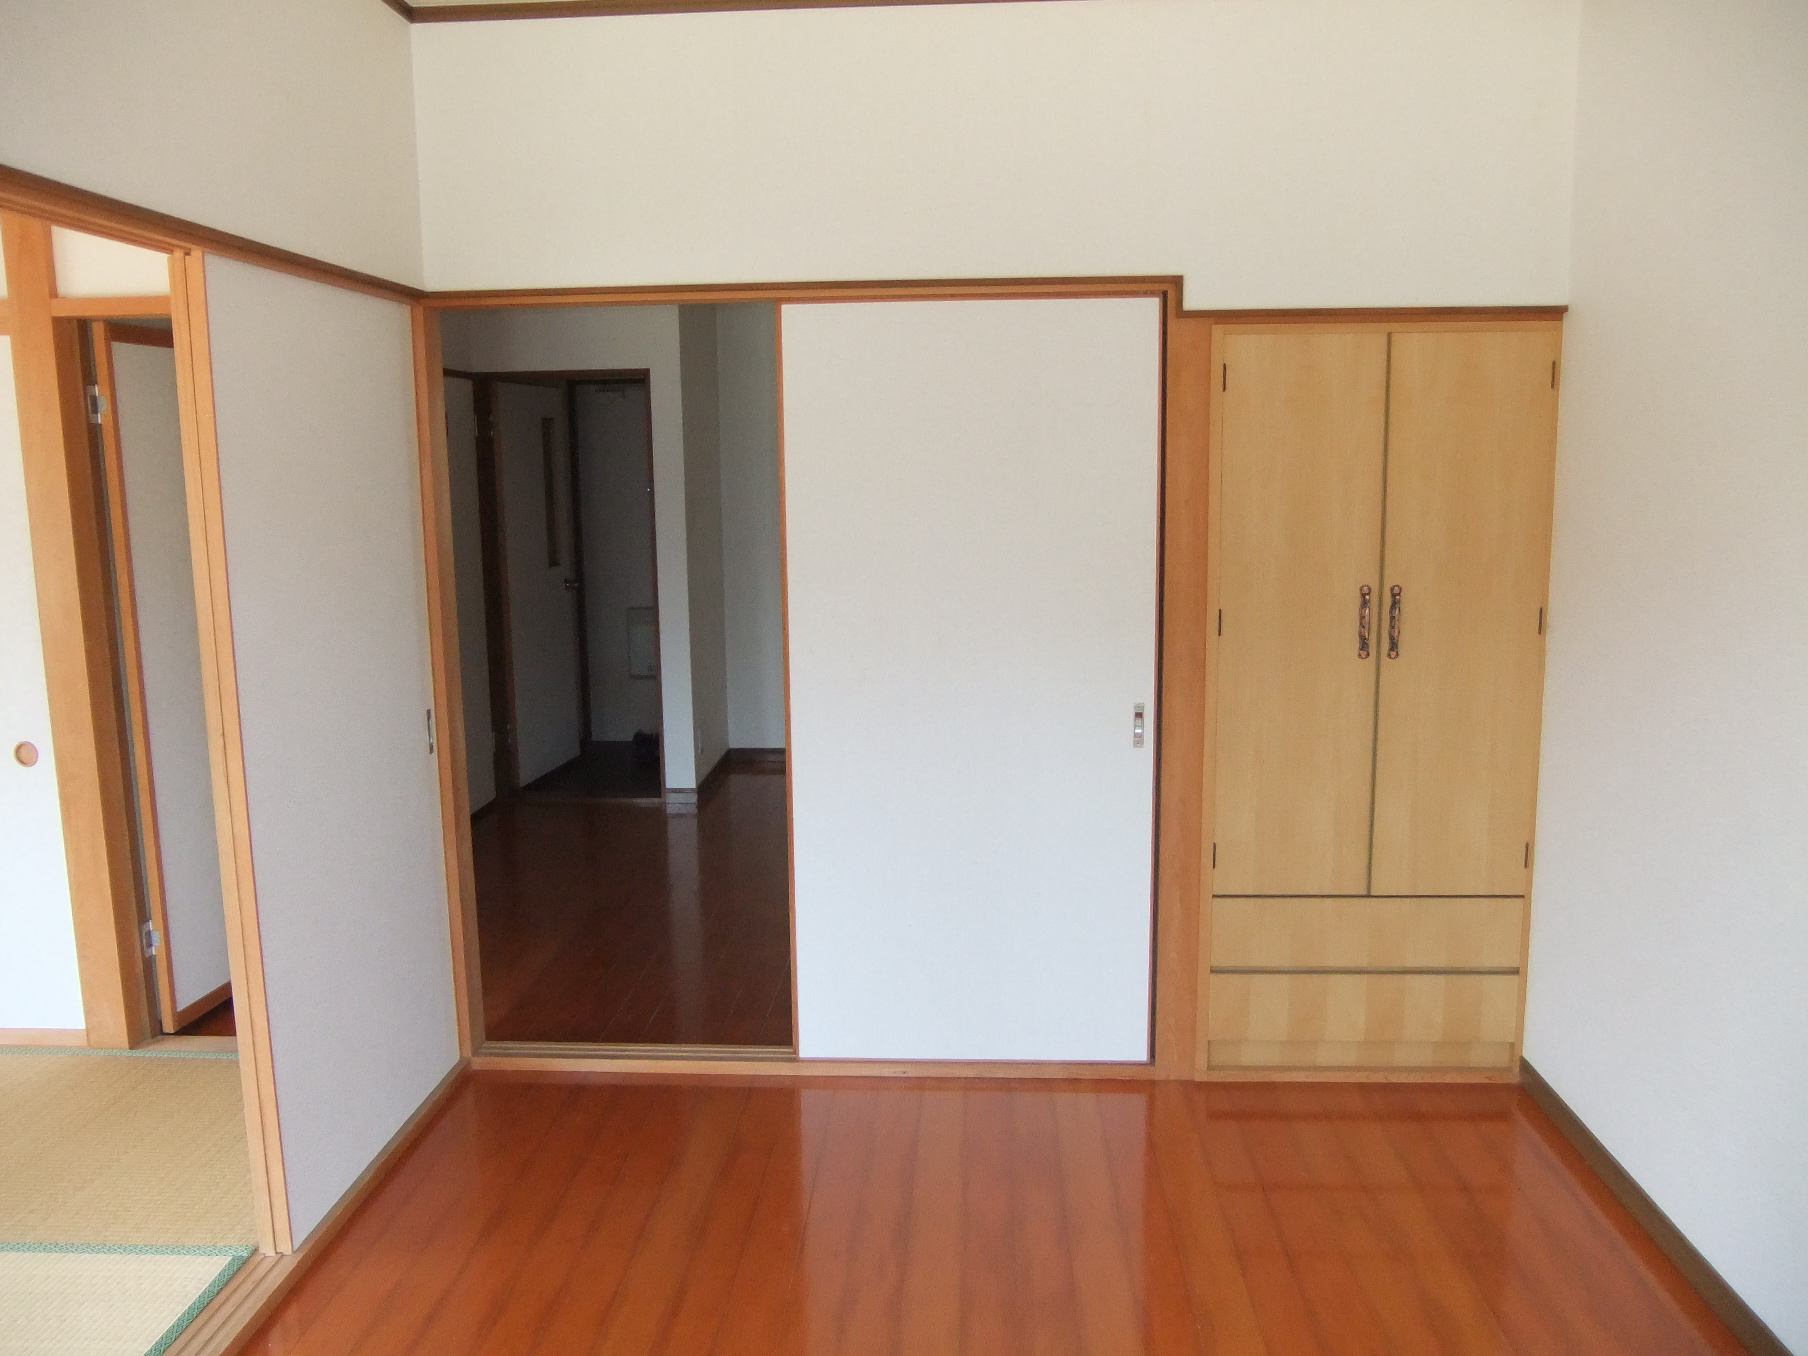 Living and room. Is a Japanese style Western-style room.